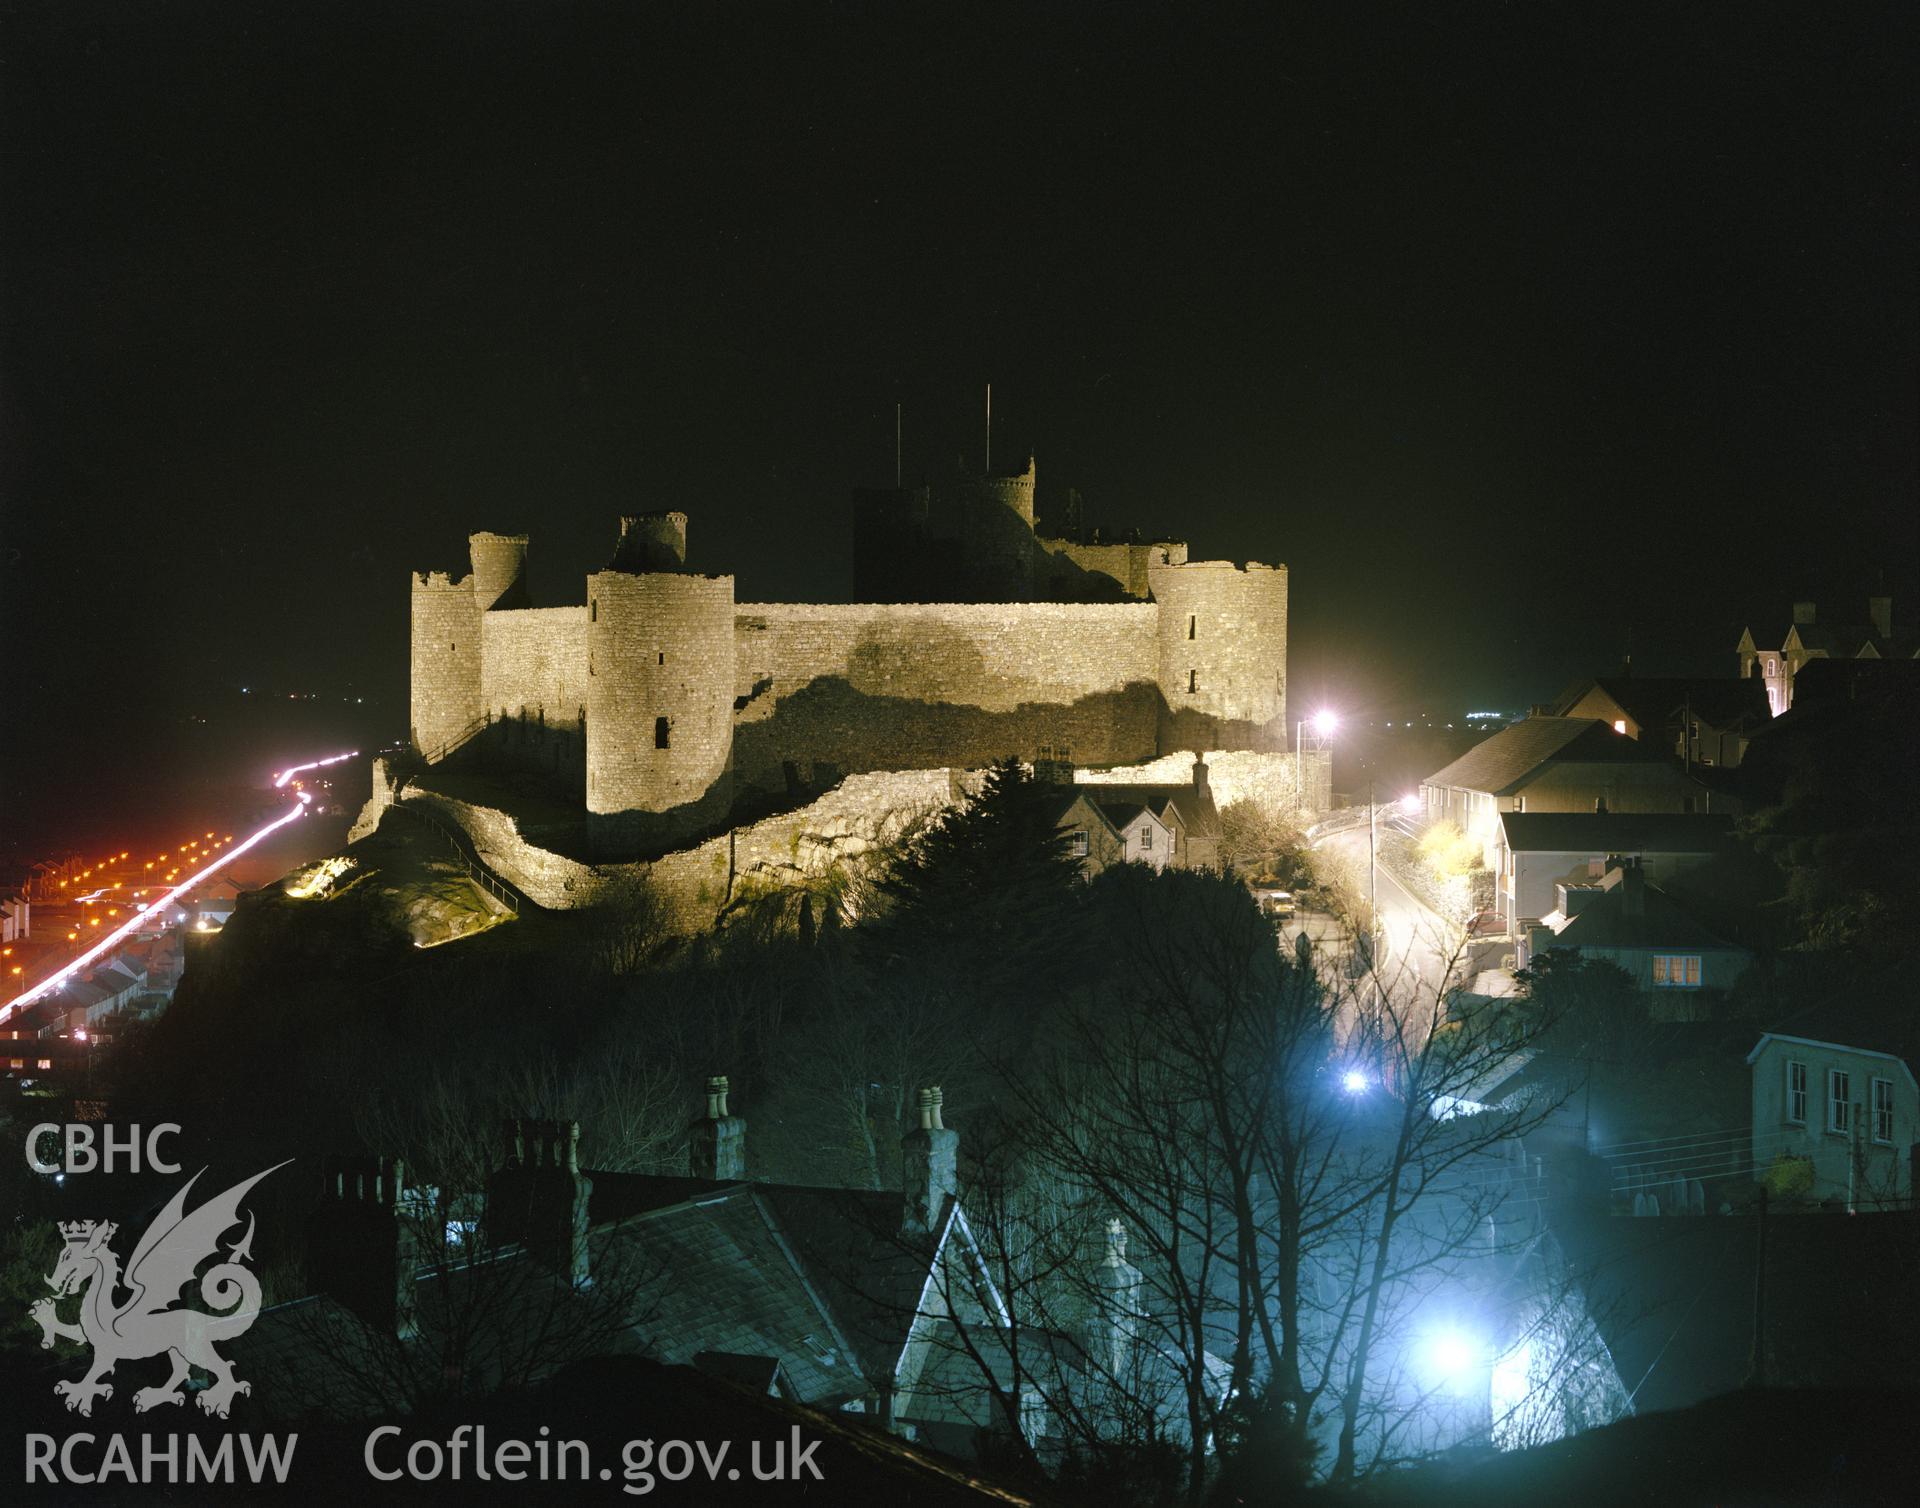 View of Harlech castle at night